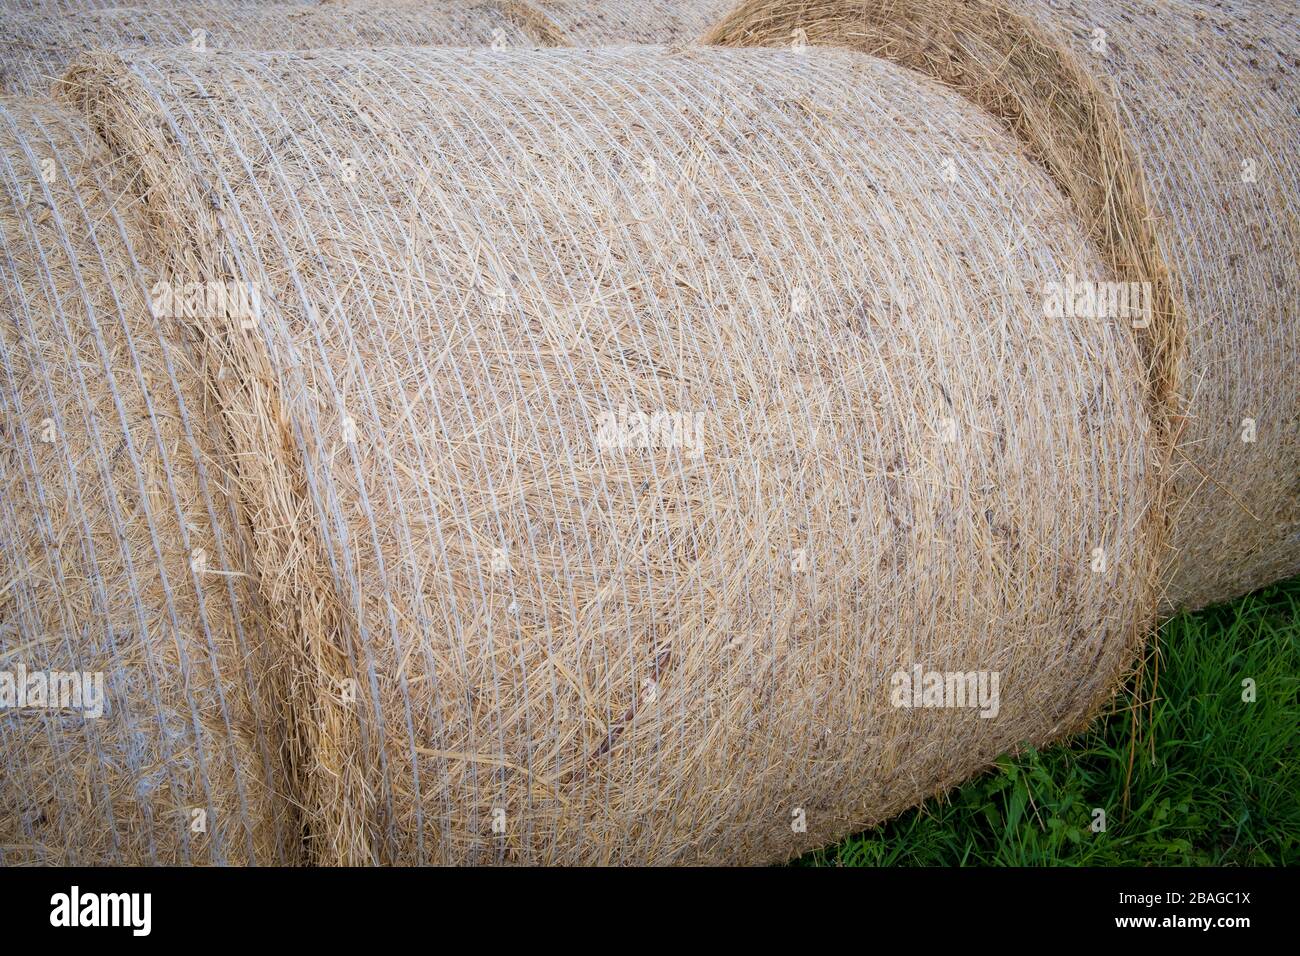 Round straw bales in a field. Nemunas Delta. Lithuania. Stock Photo